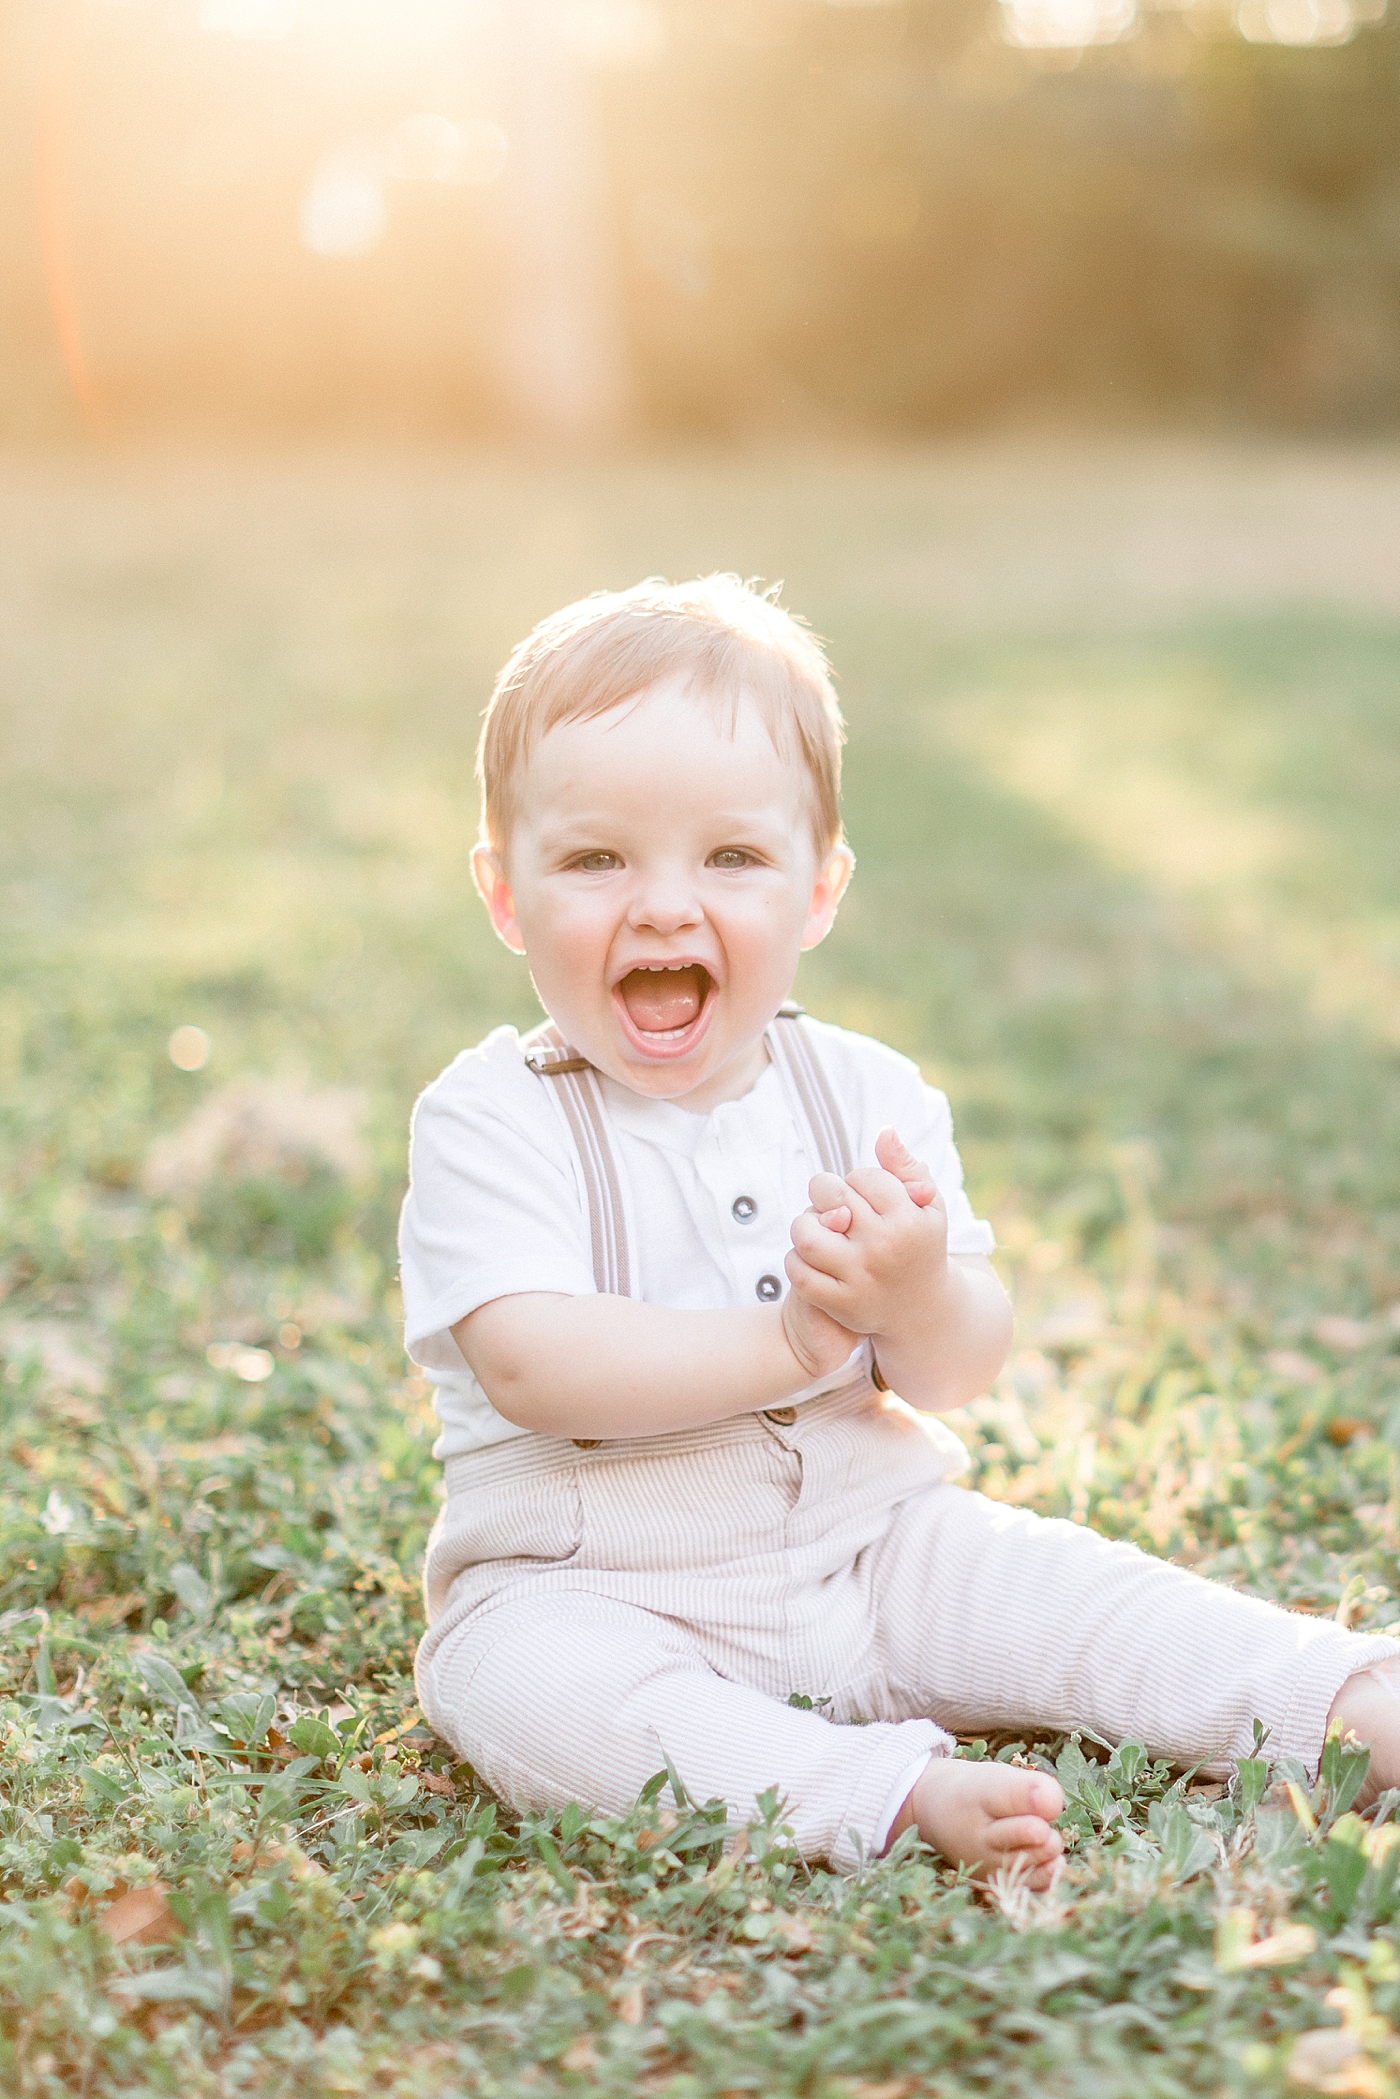 One year old boy sitting in field at sunset for his first birthday photoshoot. Photo by Brittany Elise Photography.